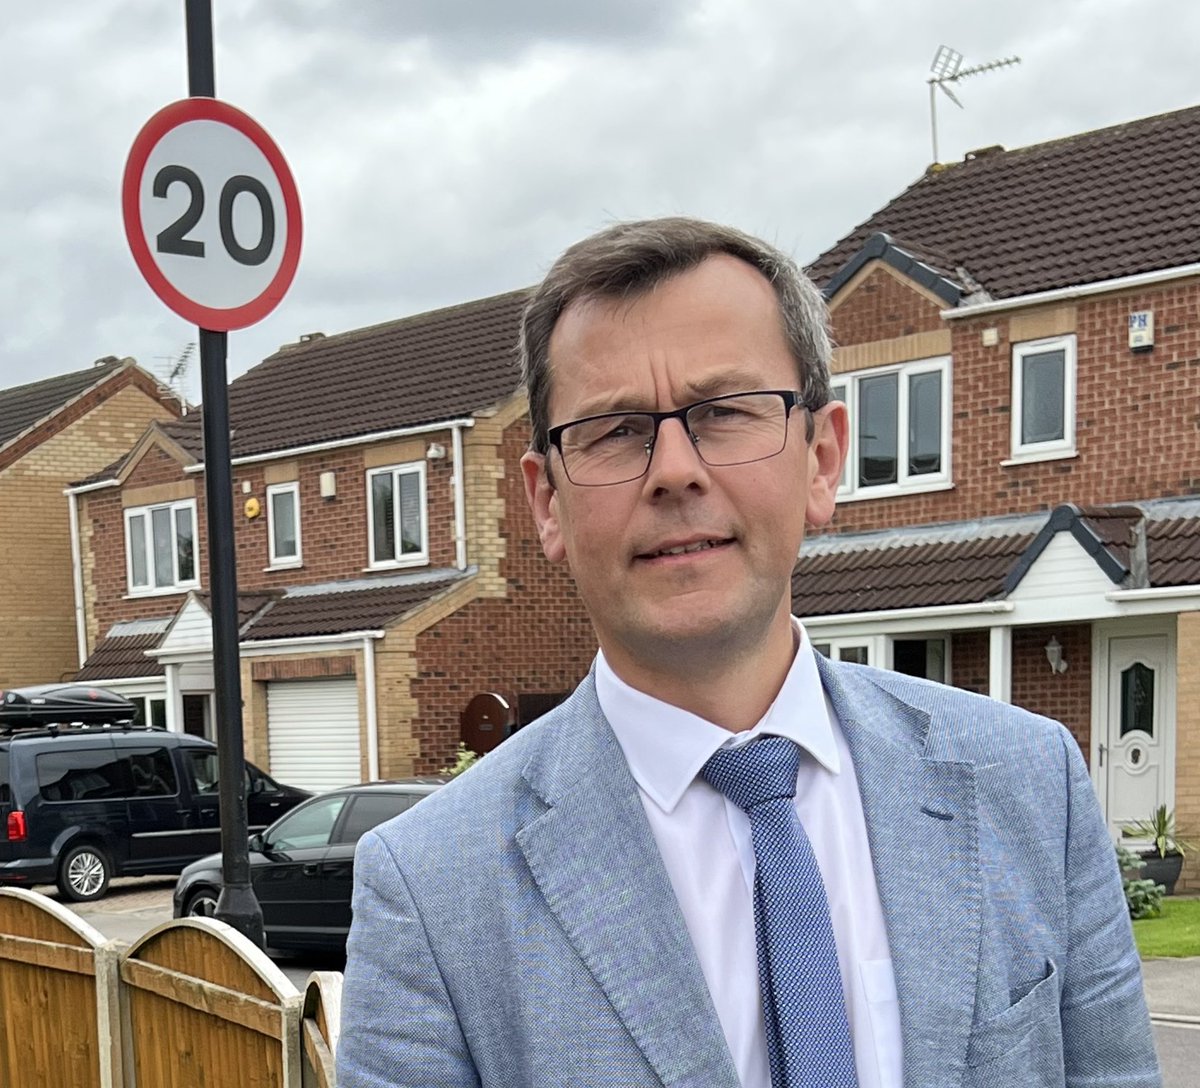 20 MPH? Do you see this as an enhancement to your area? Would you rather have pedestrian crossings? m.facebook.com/story.php?stor… Let me know your views. I’m not sure that this Mayoral initiative @MyDoncaster is well thought through. #Doncasterisgreat #stronglocaleconomy